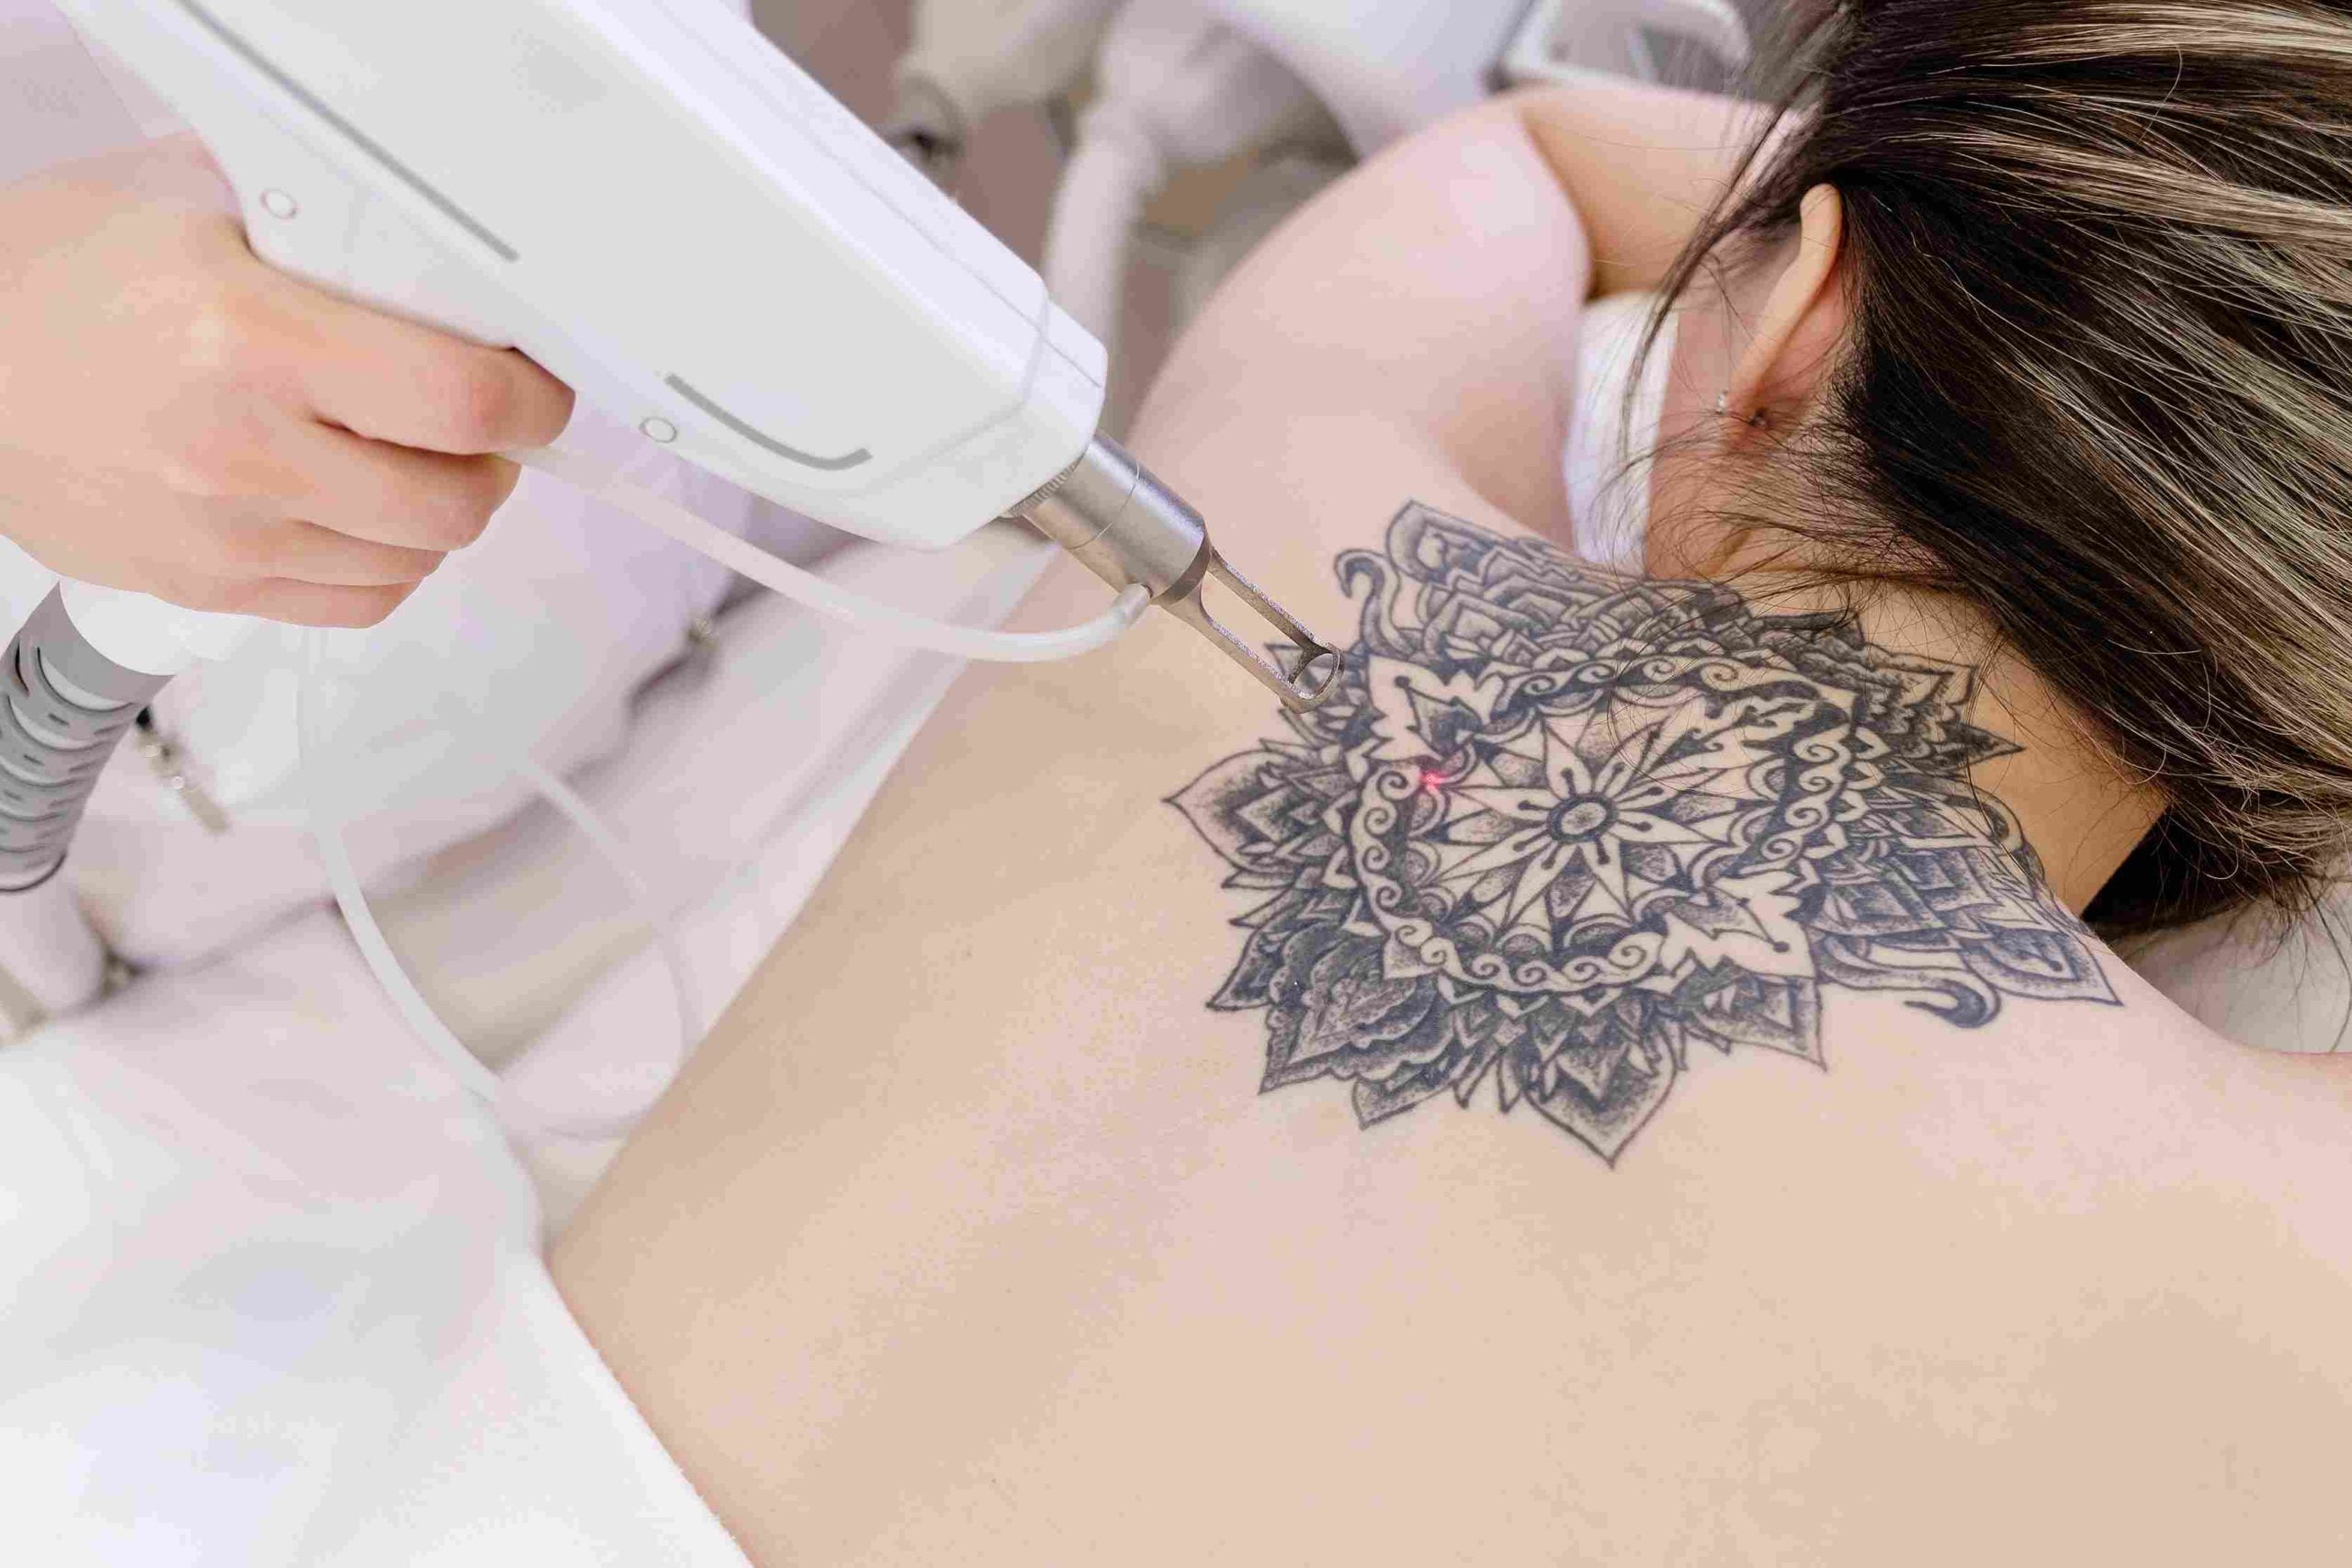 Woman Receiving Pico Laser Tattoo Removal Treatment on her Back | Avail Aesthetics in Raleigh, NC